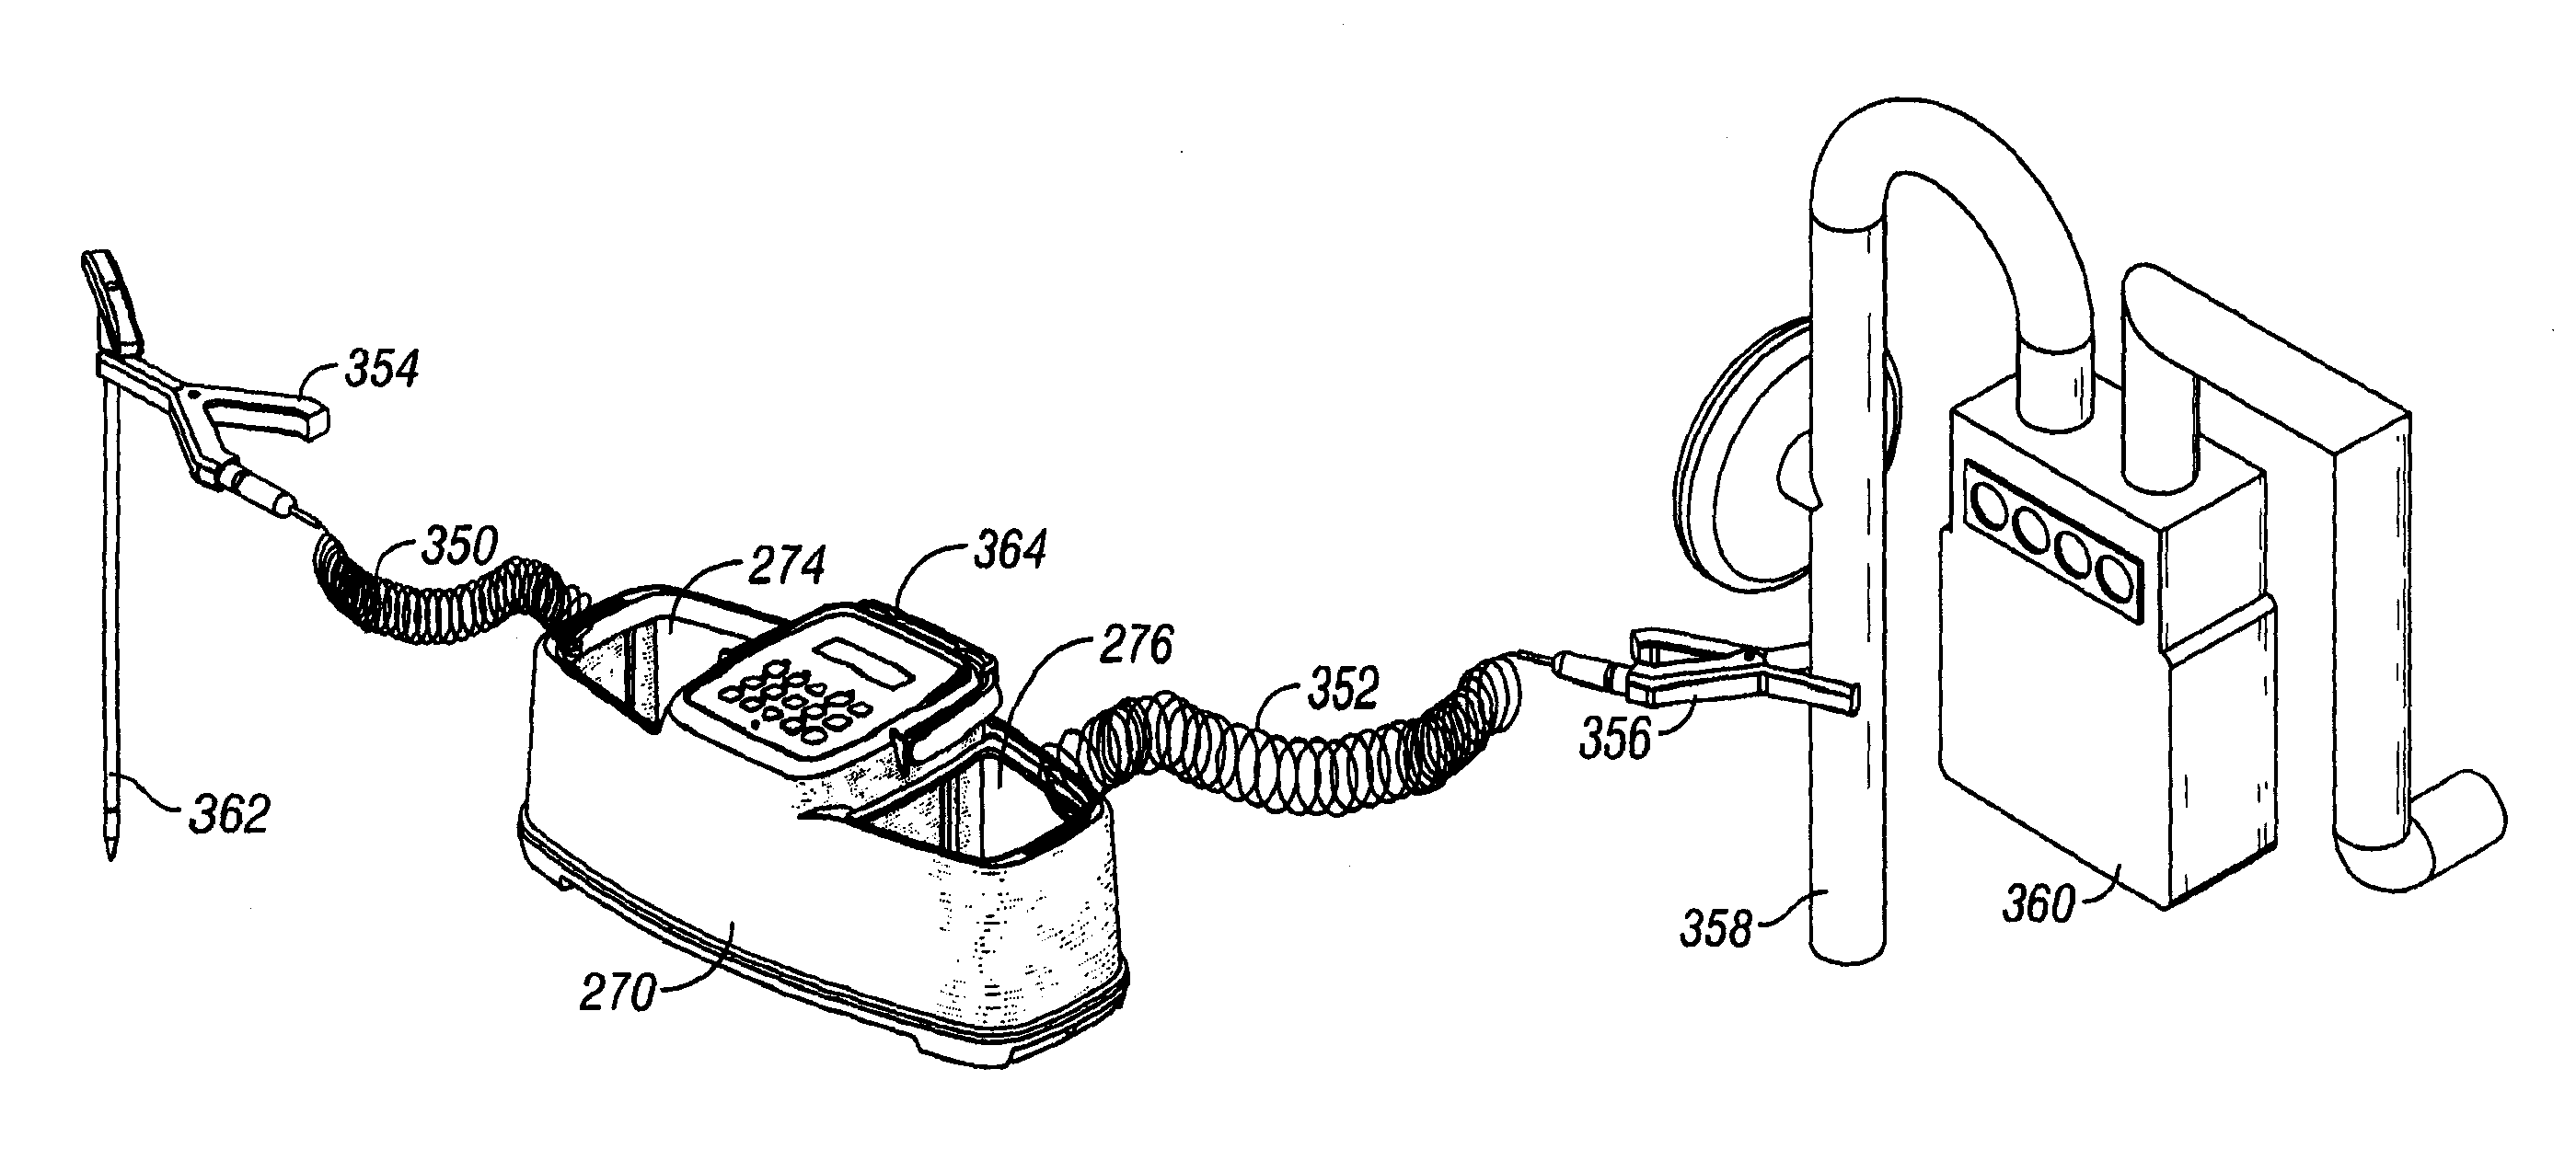 Underground utility locator with a transmitter, a pair of upwardly opening pockets and helical coil type electrical cords